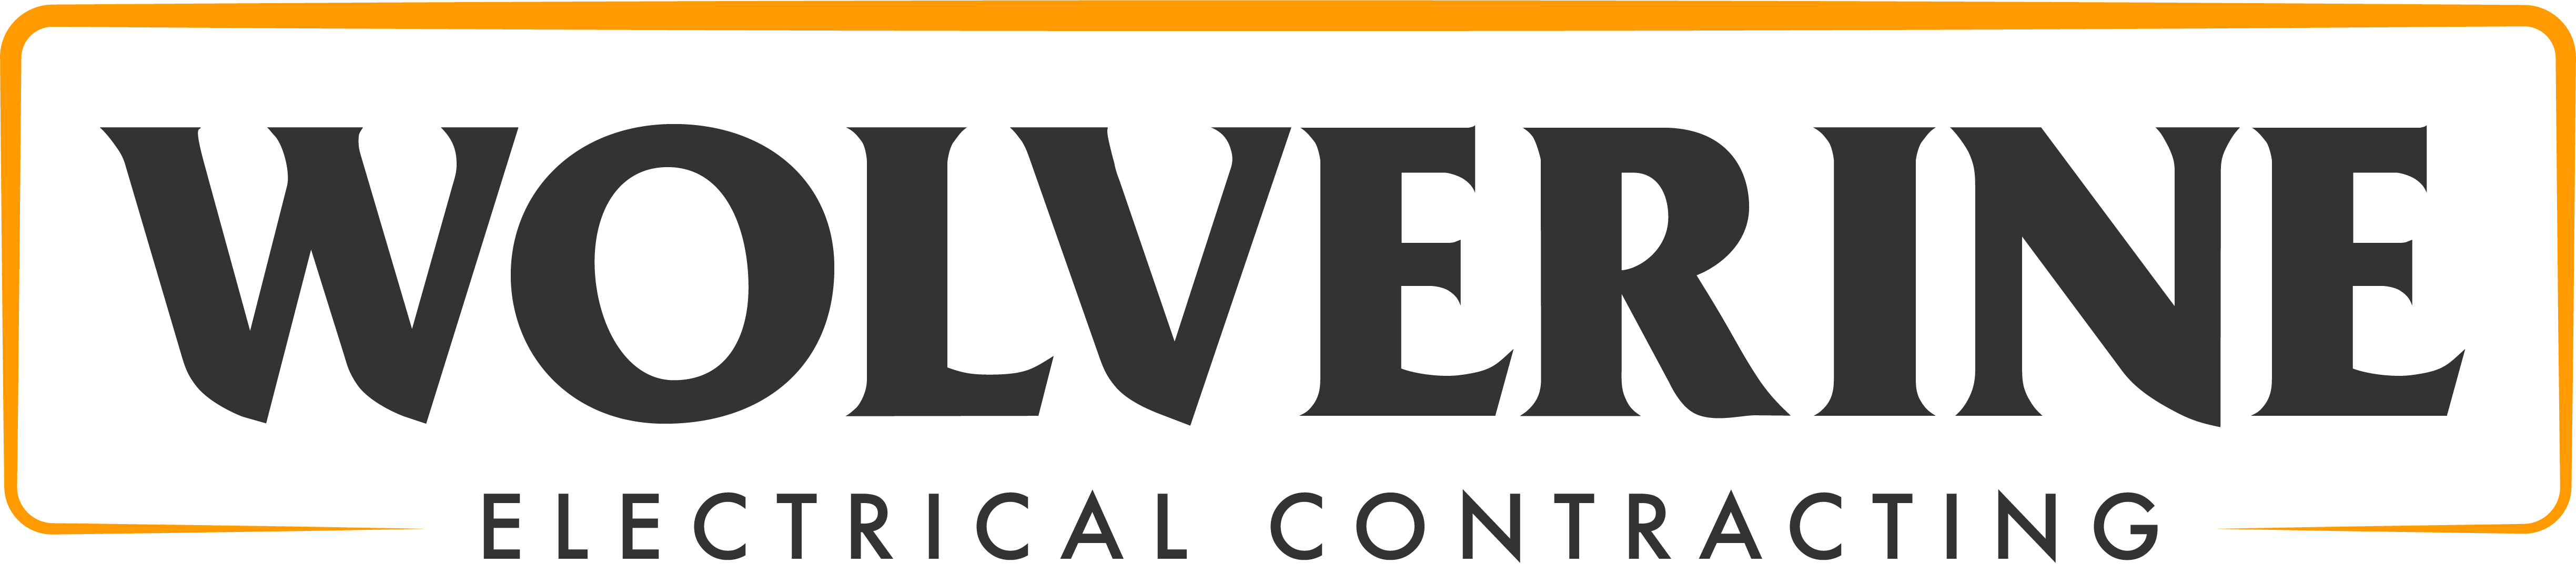 Wolverine Electrical Contracting Logo